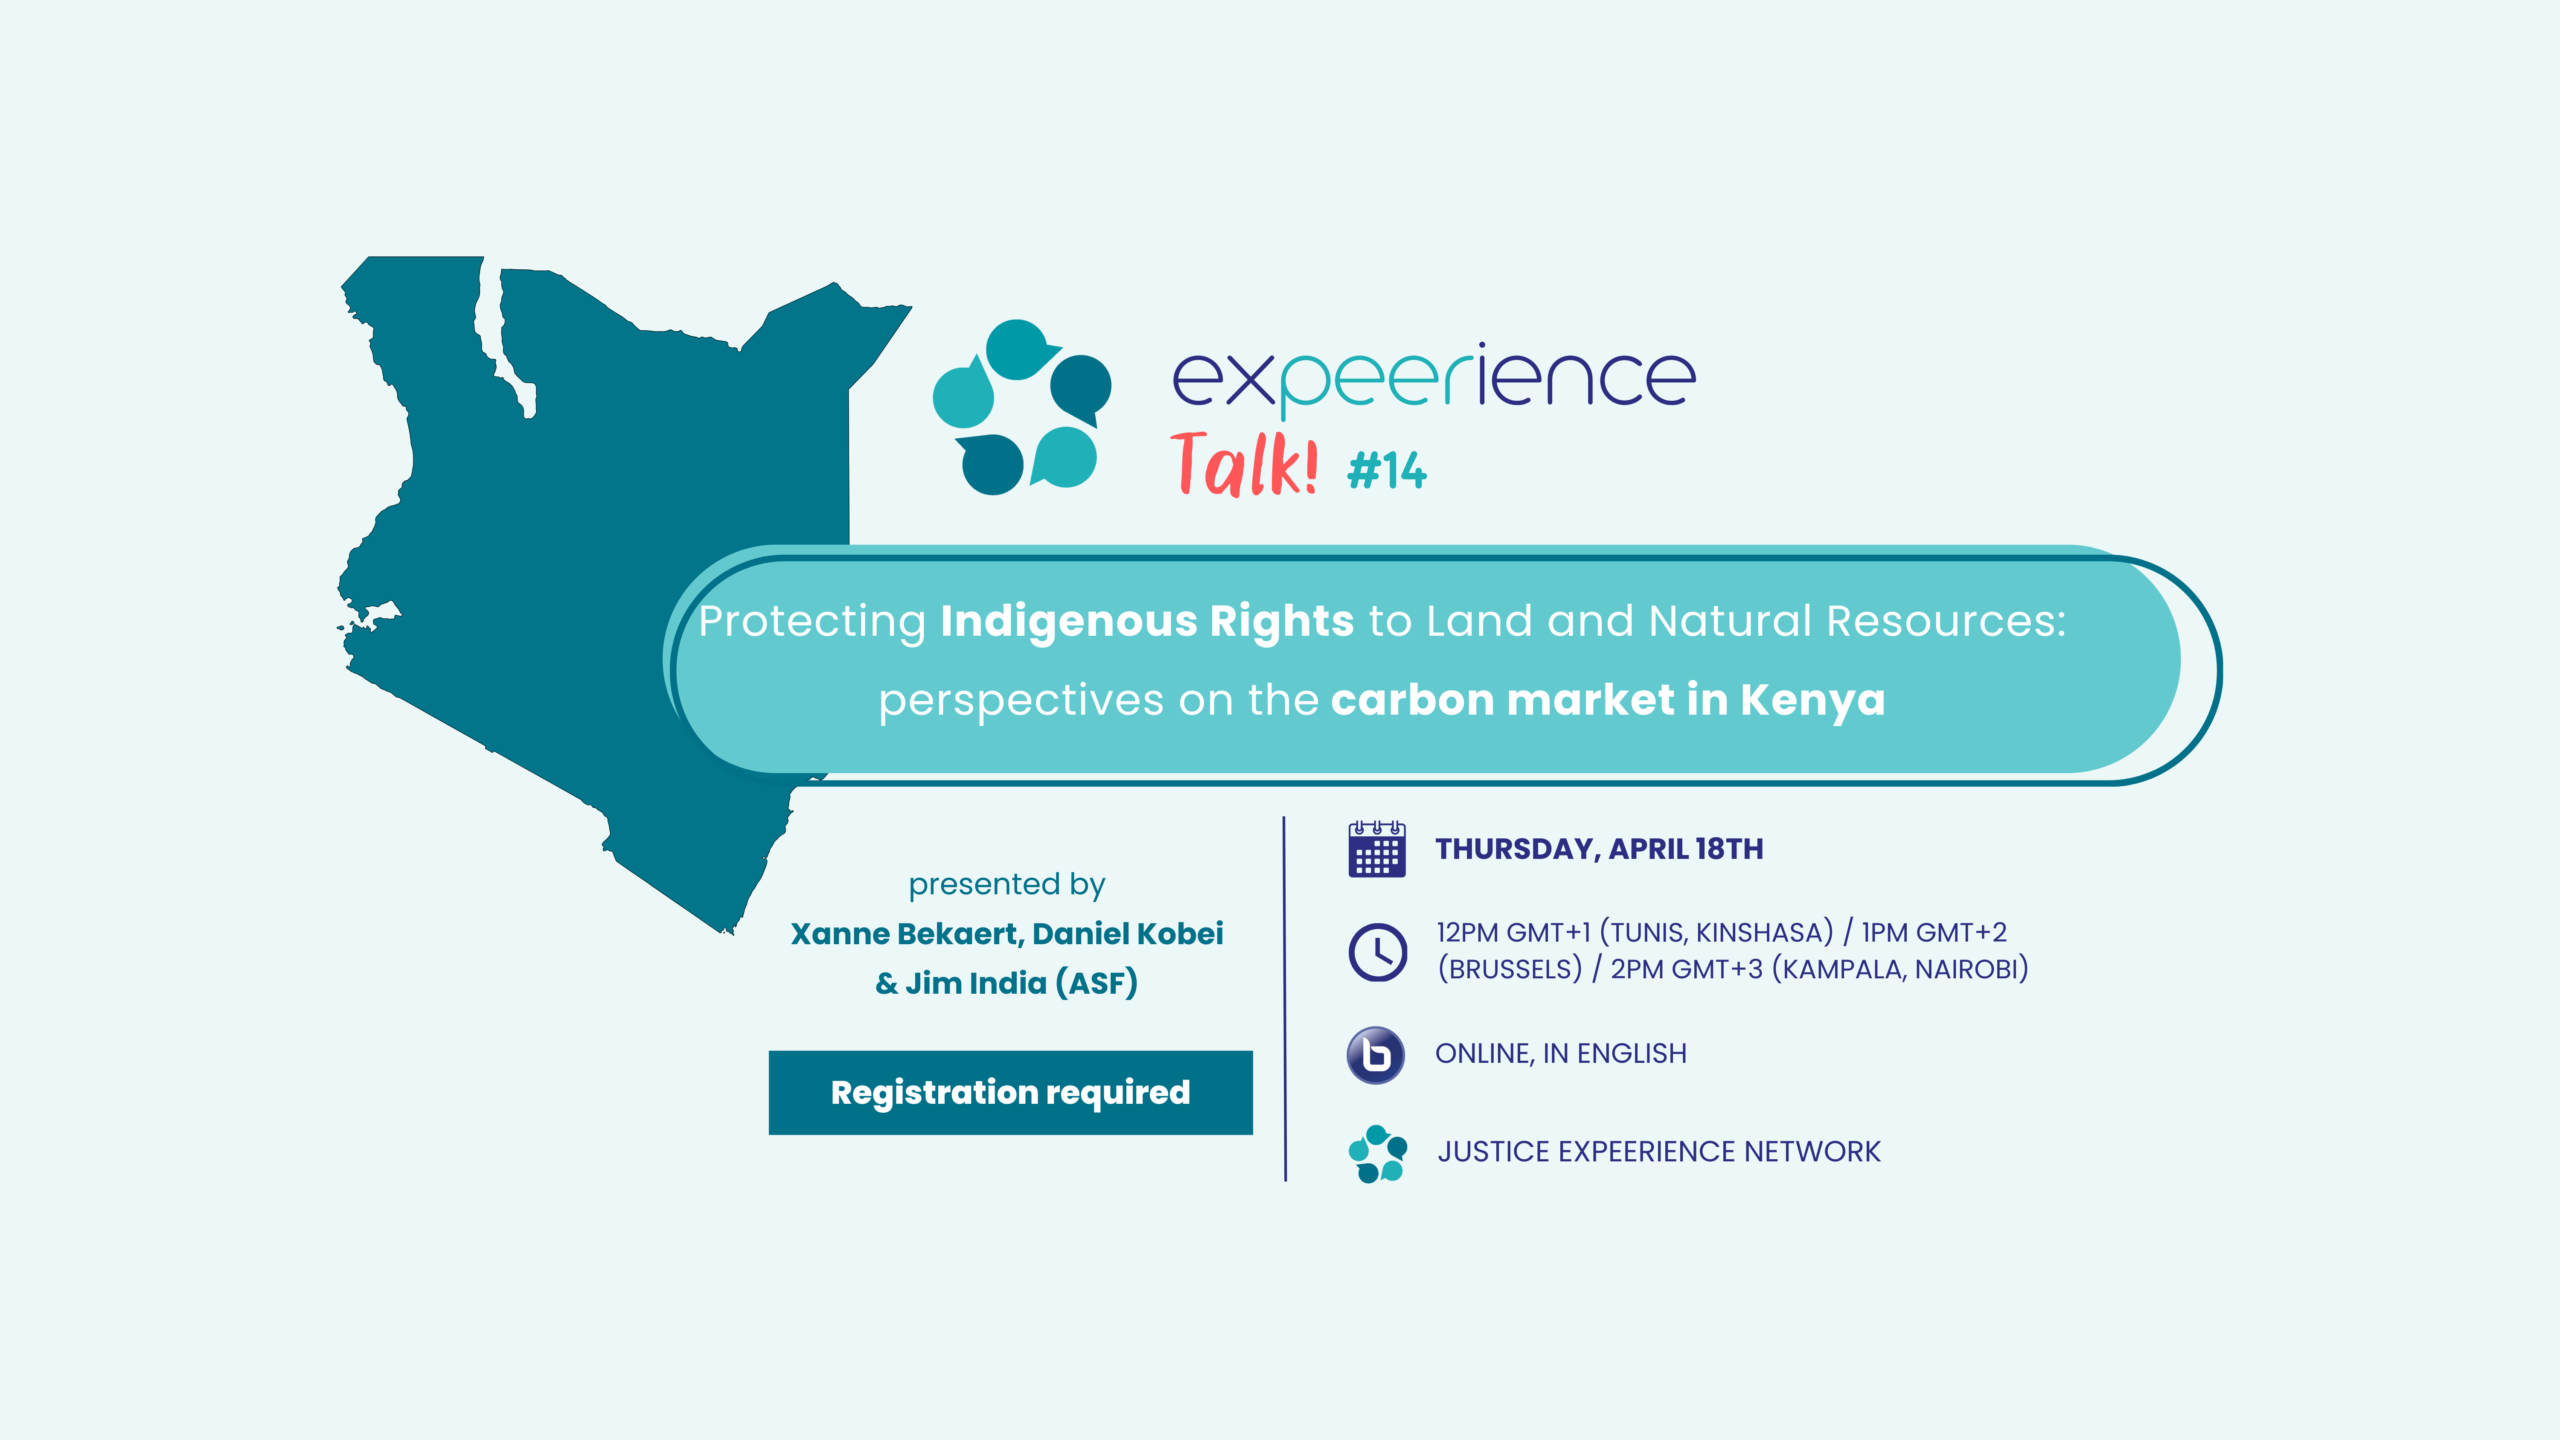 ExPEERience Talk #14 – Protecting Indigenous Rights to Land and Natural Resources: perspectives on the carbon market in Kenya